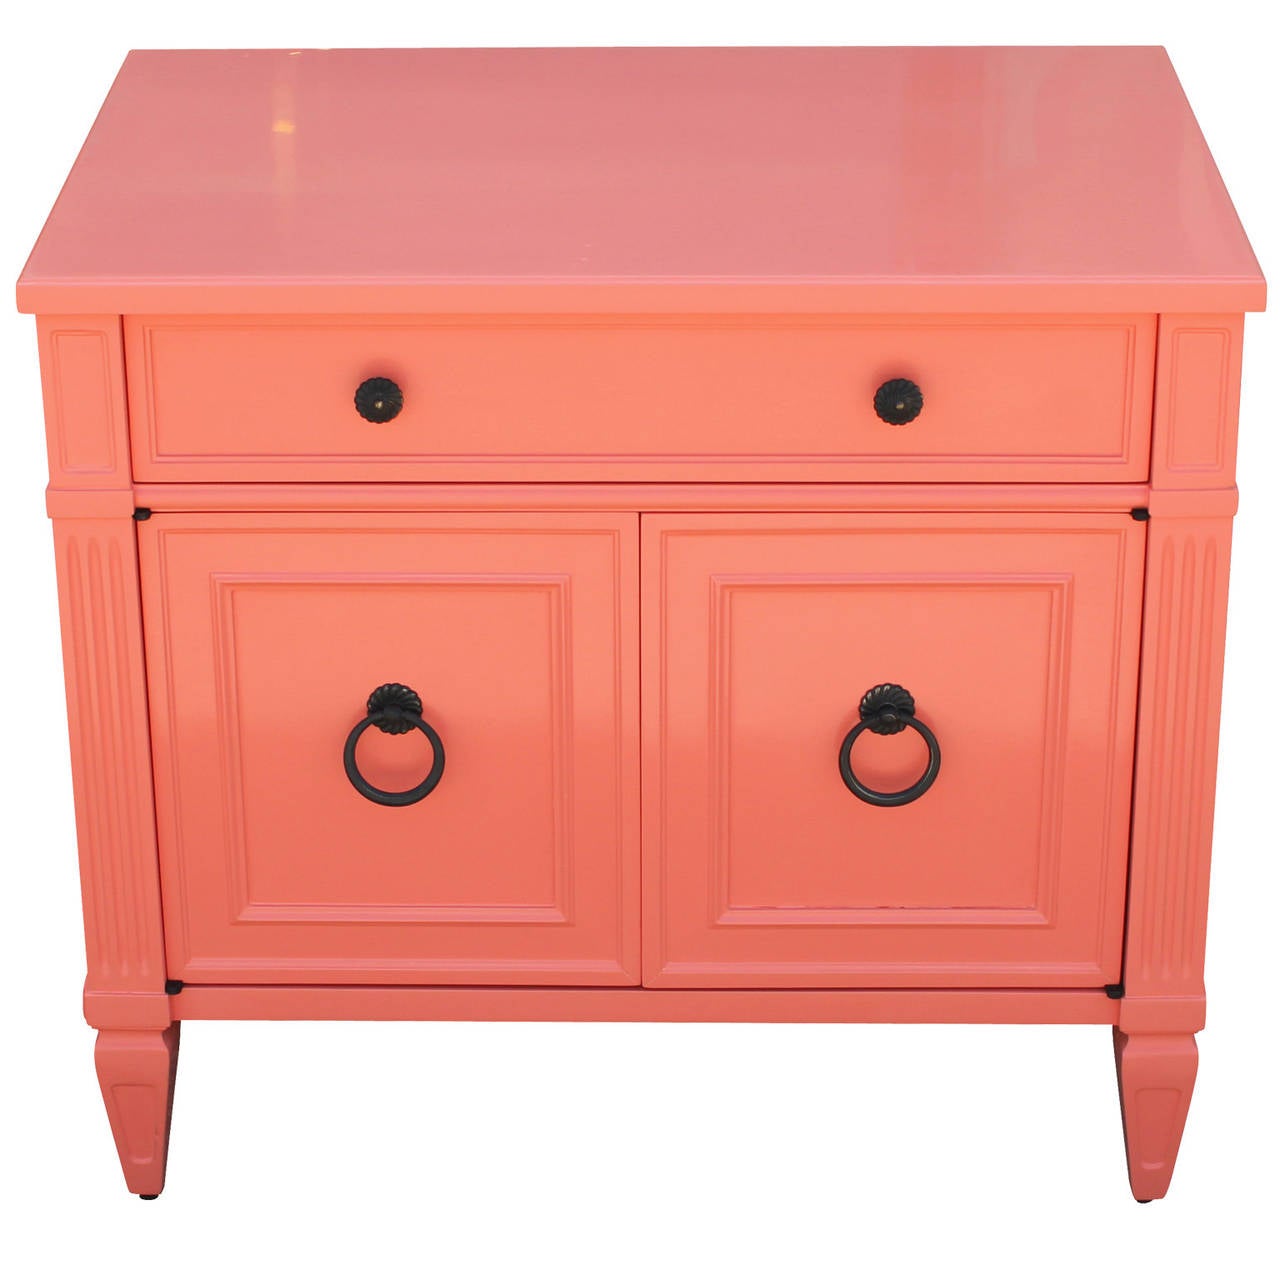 Charming pair of Henredon night stands freshly lacquered in bold coral color. A single drawer and cabinet provide ample storage. Interior of cabinet is finished in lacquer lacquer as well. Black metal hardware provides nice contrast. Bedside 